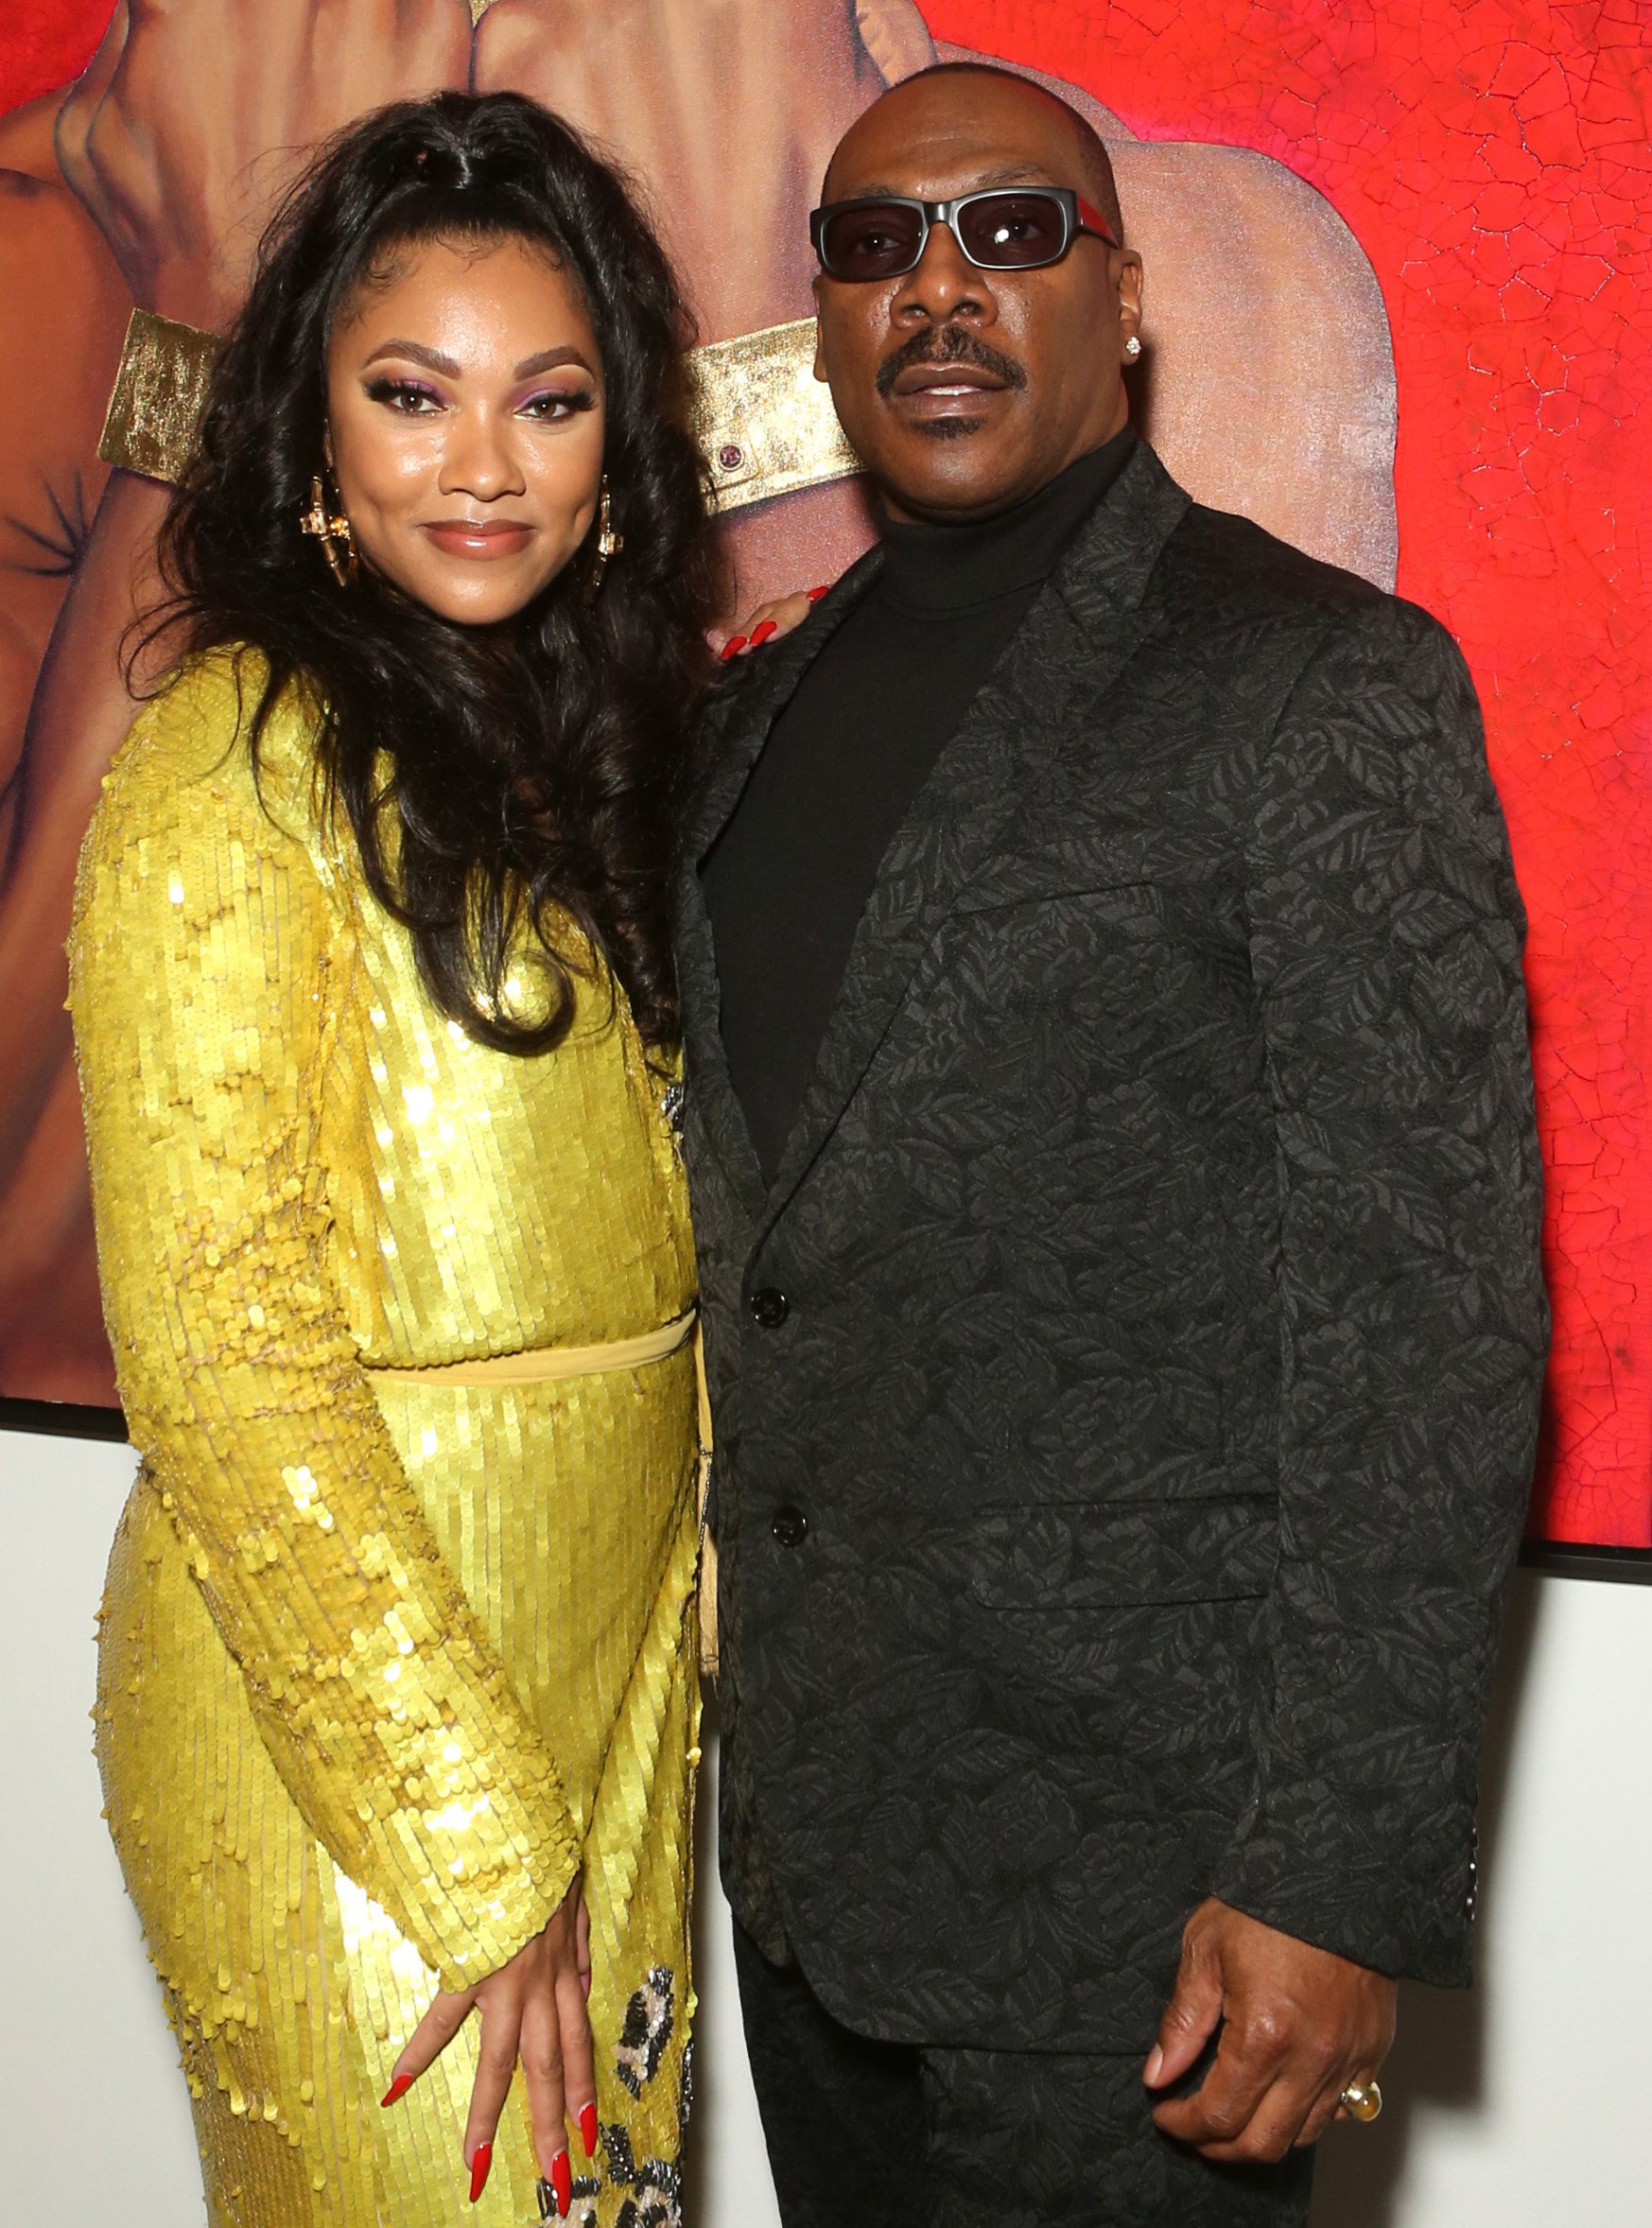 <p>Bria Murphy, who was born in 1989, and dad Eddie Murphy posed together at the <a href="https://www.wonderwall.com/news/pamela-anderson-hits-back-ex-jon-peters-claims-about-why-she-married-him-money-plus-more-news-february-21-2020-3022316.gallery?photoId=1075255">model/actress-turned-artist's painting exhibition</a> at the ARTUS Gallery in Los Angeles on Feb. 20, 2020.</p>